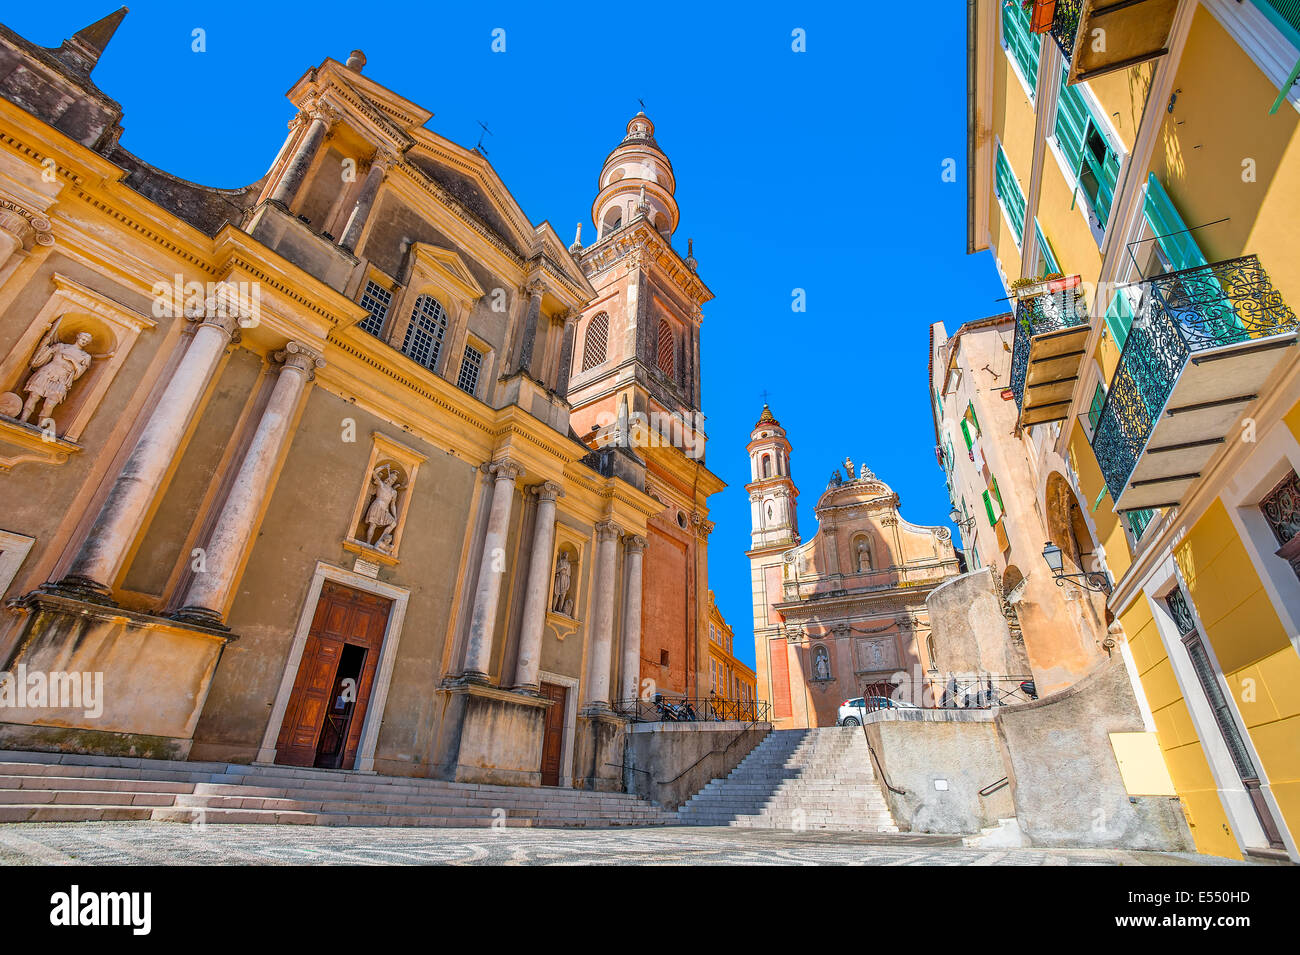 Basilica of Saint Michael Archange on small town square under blue sky in Menton, France. Stock Photo